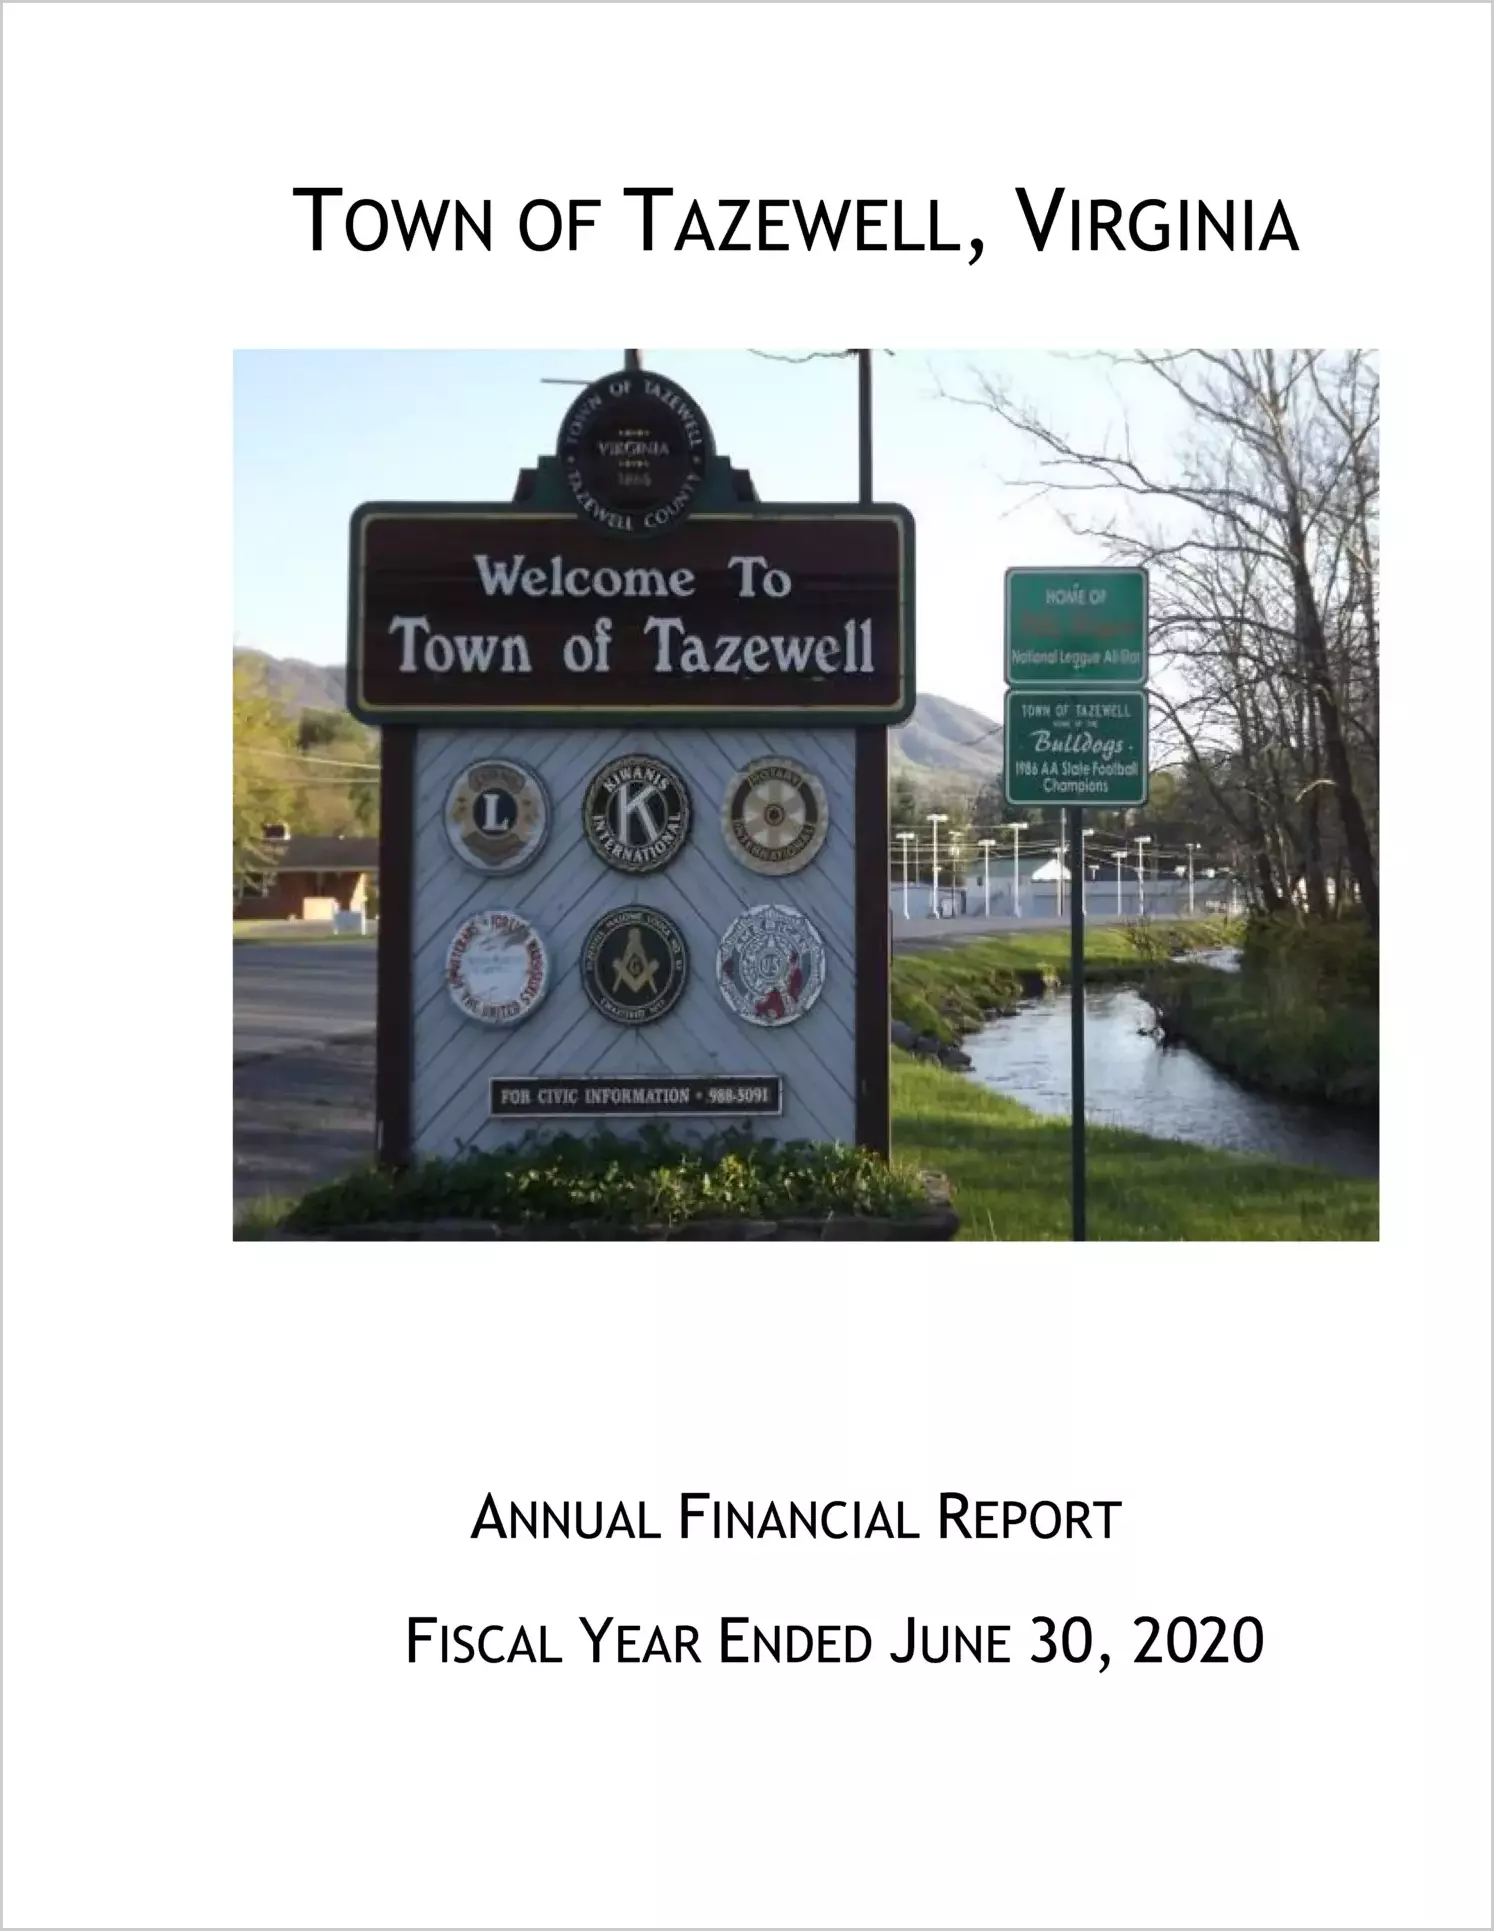 2020 Annual Financial Report for Town of Tazewell